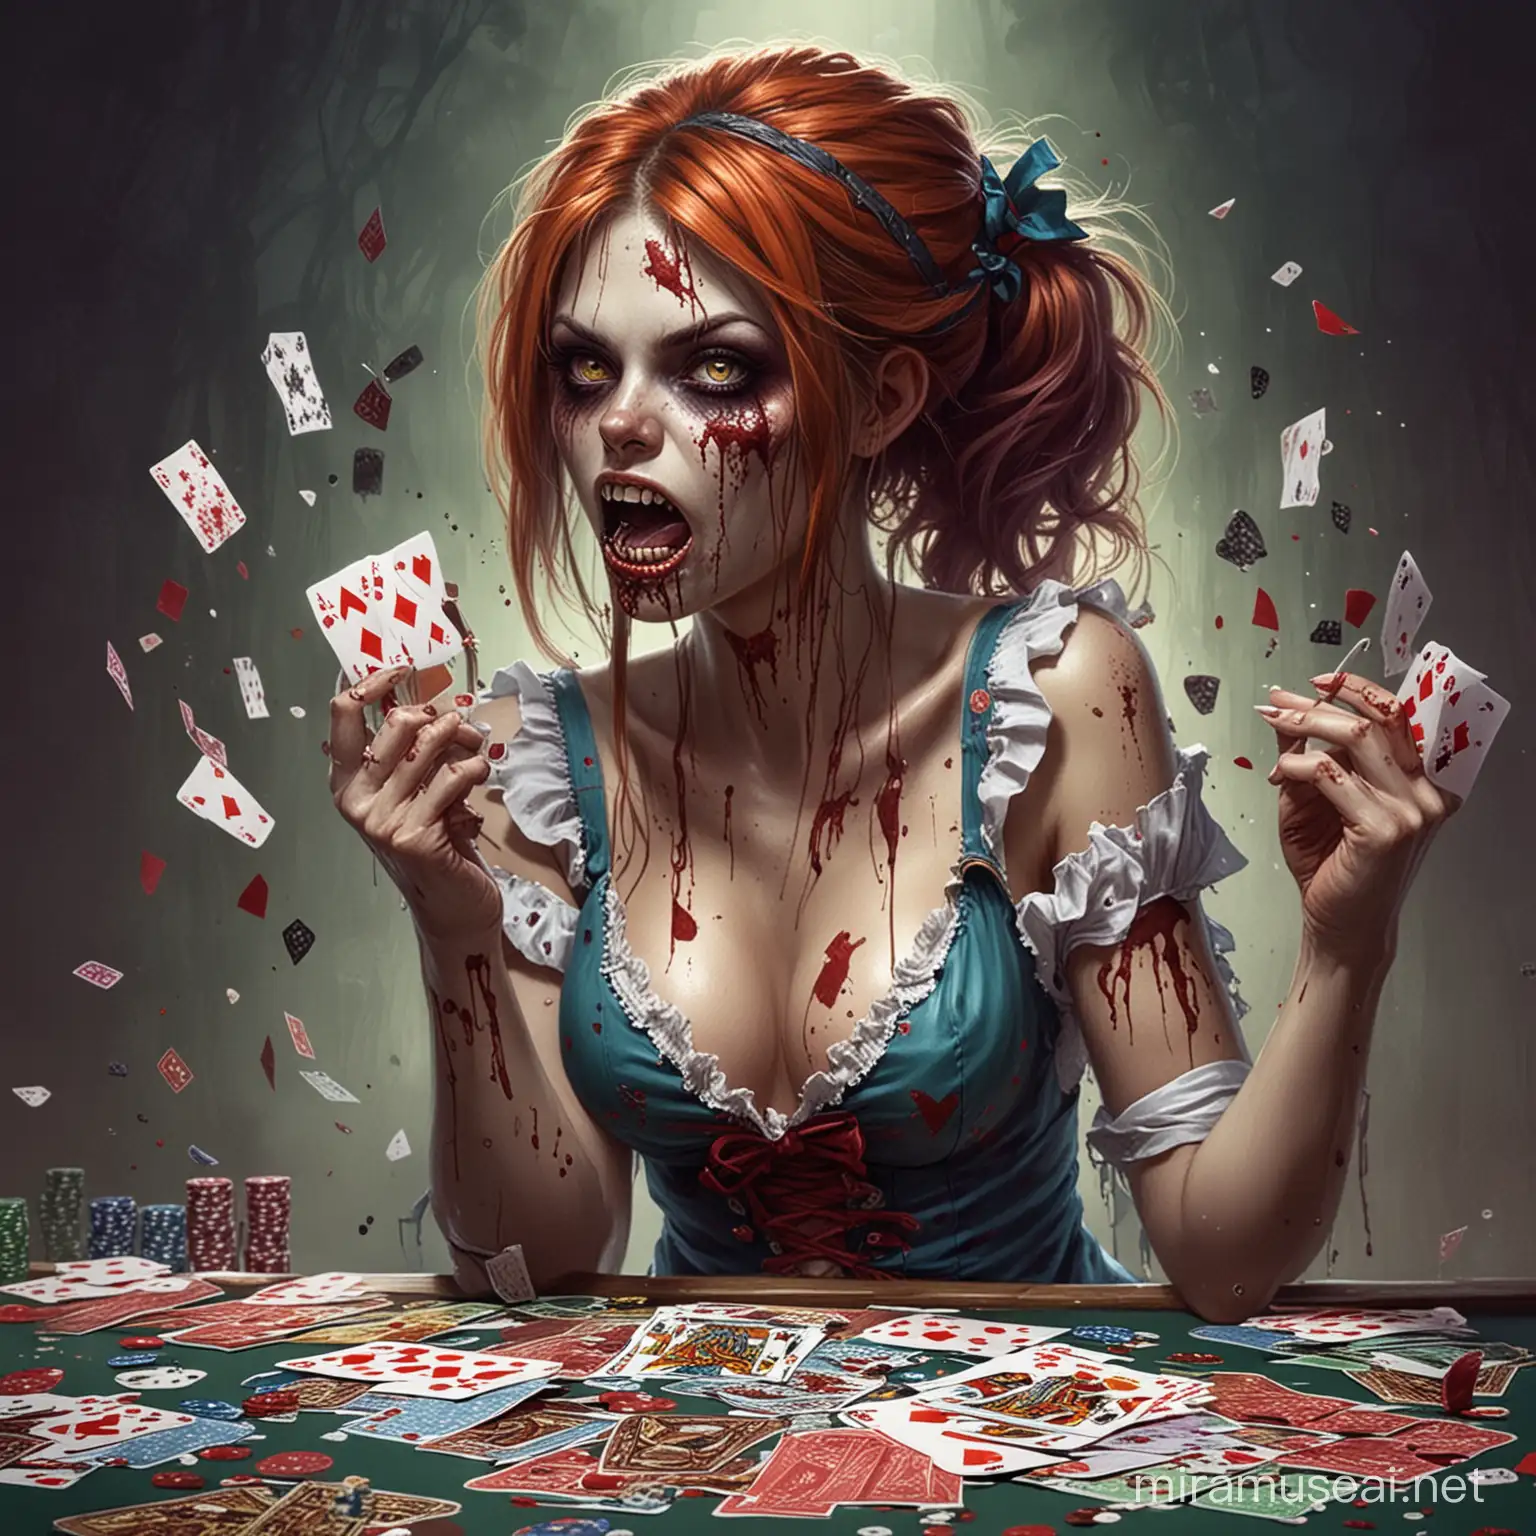 Spitting poker cards, zombie girl, beautiful, cute, colorful